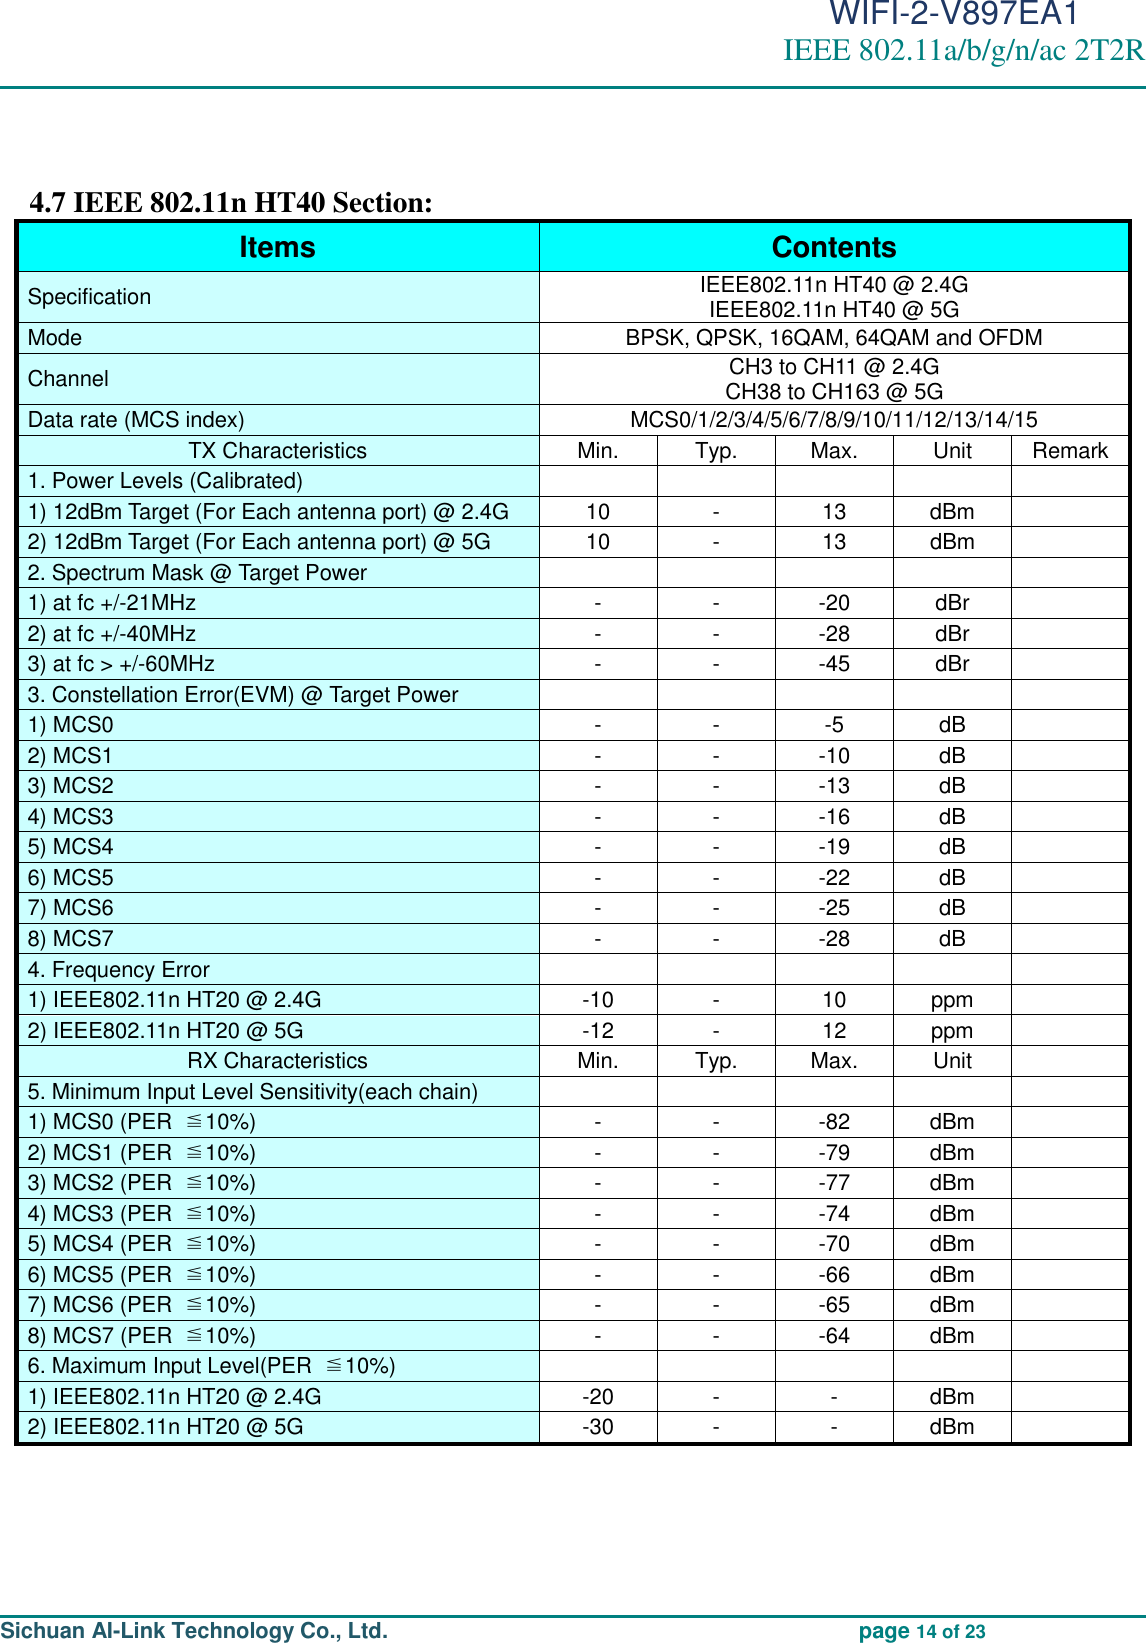                                                                                          WIFI-2-V897EA1 IEEE 802.11a/b/g/n/ac 2T2R                                                                                                                                                                                                                                                                                                                                                                                                                     Sichuan AI-Link Technology Co., Ltd.                                             page 14 of 23   4.7 IEEE 802.11n HT40 Section: Items   Contents   Specification   IEEE802.11n HT40 @ 2.4G   IEEE802.11n HT40 @ 5G Mode   BPSK, QPSK, 16QAM, 64QAM and OFDM Channel   CH3 to CH11 @ 2.4G CH38 to CH163 @ 5G Data rate (MCS index)   MCS0/1/2/3/4/5/6/7/8/9/10/11/12/13/14/15   TX Characteristics Min.   Typ.   Max.   Unit   Remark  1. Power Levels (Calibrated)             1) 12dBm Target (For Each antenna port) @ 2.4G 10 - 13 dBm     2) 12dBm Target (For Each antenna port) @ 5G 10 - 13 dBm  2. Spectrum Mask @ Target Power       1) at fc +/-21MHz   - - -20 dBr     2) at fc +/-40MHz   - - -28 dBr     3) at fc &gt; +/-60MHz   - - -45 dBr     3. Constellation Error(EVM) @ Target Power             1) MCS0   - - -5 dB     2) MCS1   - - -10 dB     3) MCS2   - - -13 dB     4) MCS3   - - -16 dB     5) MCS4   - - -19 dB     6) MCS5   - - -22 dB     7) MCS6   - - -25 dB     8) MCS7   - - -28 dB     4. Frequency Error         1) IEEE802.11n HT20 @ 2.4G -10 - 10 ppm    2) IEEE802.11n HT20 @ 5G -12 - 12 ppm    RX Characteristics Min.   Typ.   Max.   Unit     5. Minimum Input Level Sensitivity(each chain)             1) MCS0 (PER  ≦10%) - - -82 dBm      2) MCS1 (PER  ≦10%) - - -79 dBm      3) MCS2 (PER  ≦10%) - - -77 dBm      4) MCS3 (PER  ≦10%) - - -74 dBm      5) MCS4 (PER  ≦10%) - - -70 dBm      6) MCS5 (PER  ≦10%) - - -66 dBm      7) MCS6 (PER  ≦10%) - - -65 dBm      8) MCS7 (PER  ≦10%) - - -64 dBm     6. Maximum Input Level(PER  ≦10%)       1) IEEE802.11n HT20 @ 2.4G -20 - - dBm    2) IEEE802.11n HT20 @ 5G -30 - - dBm       